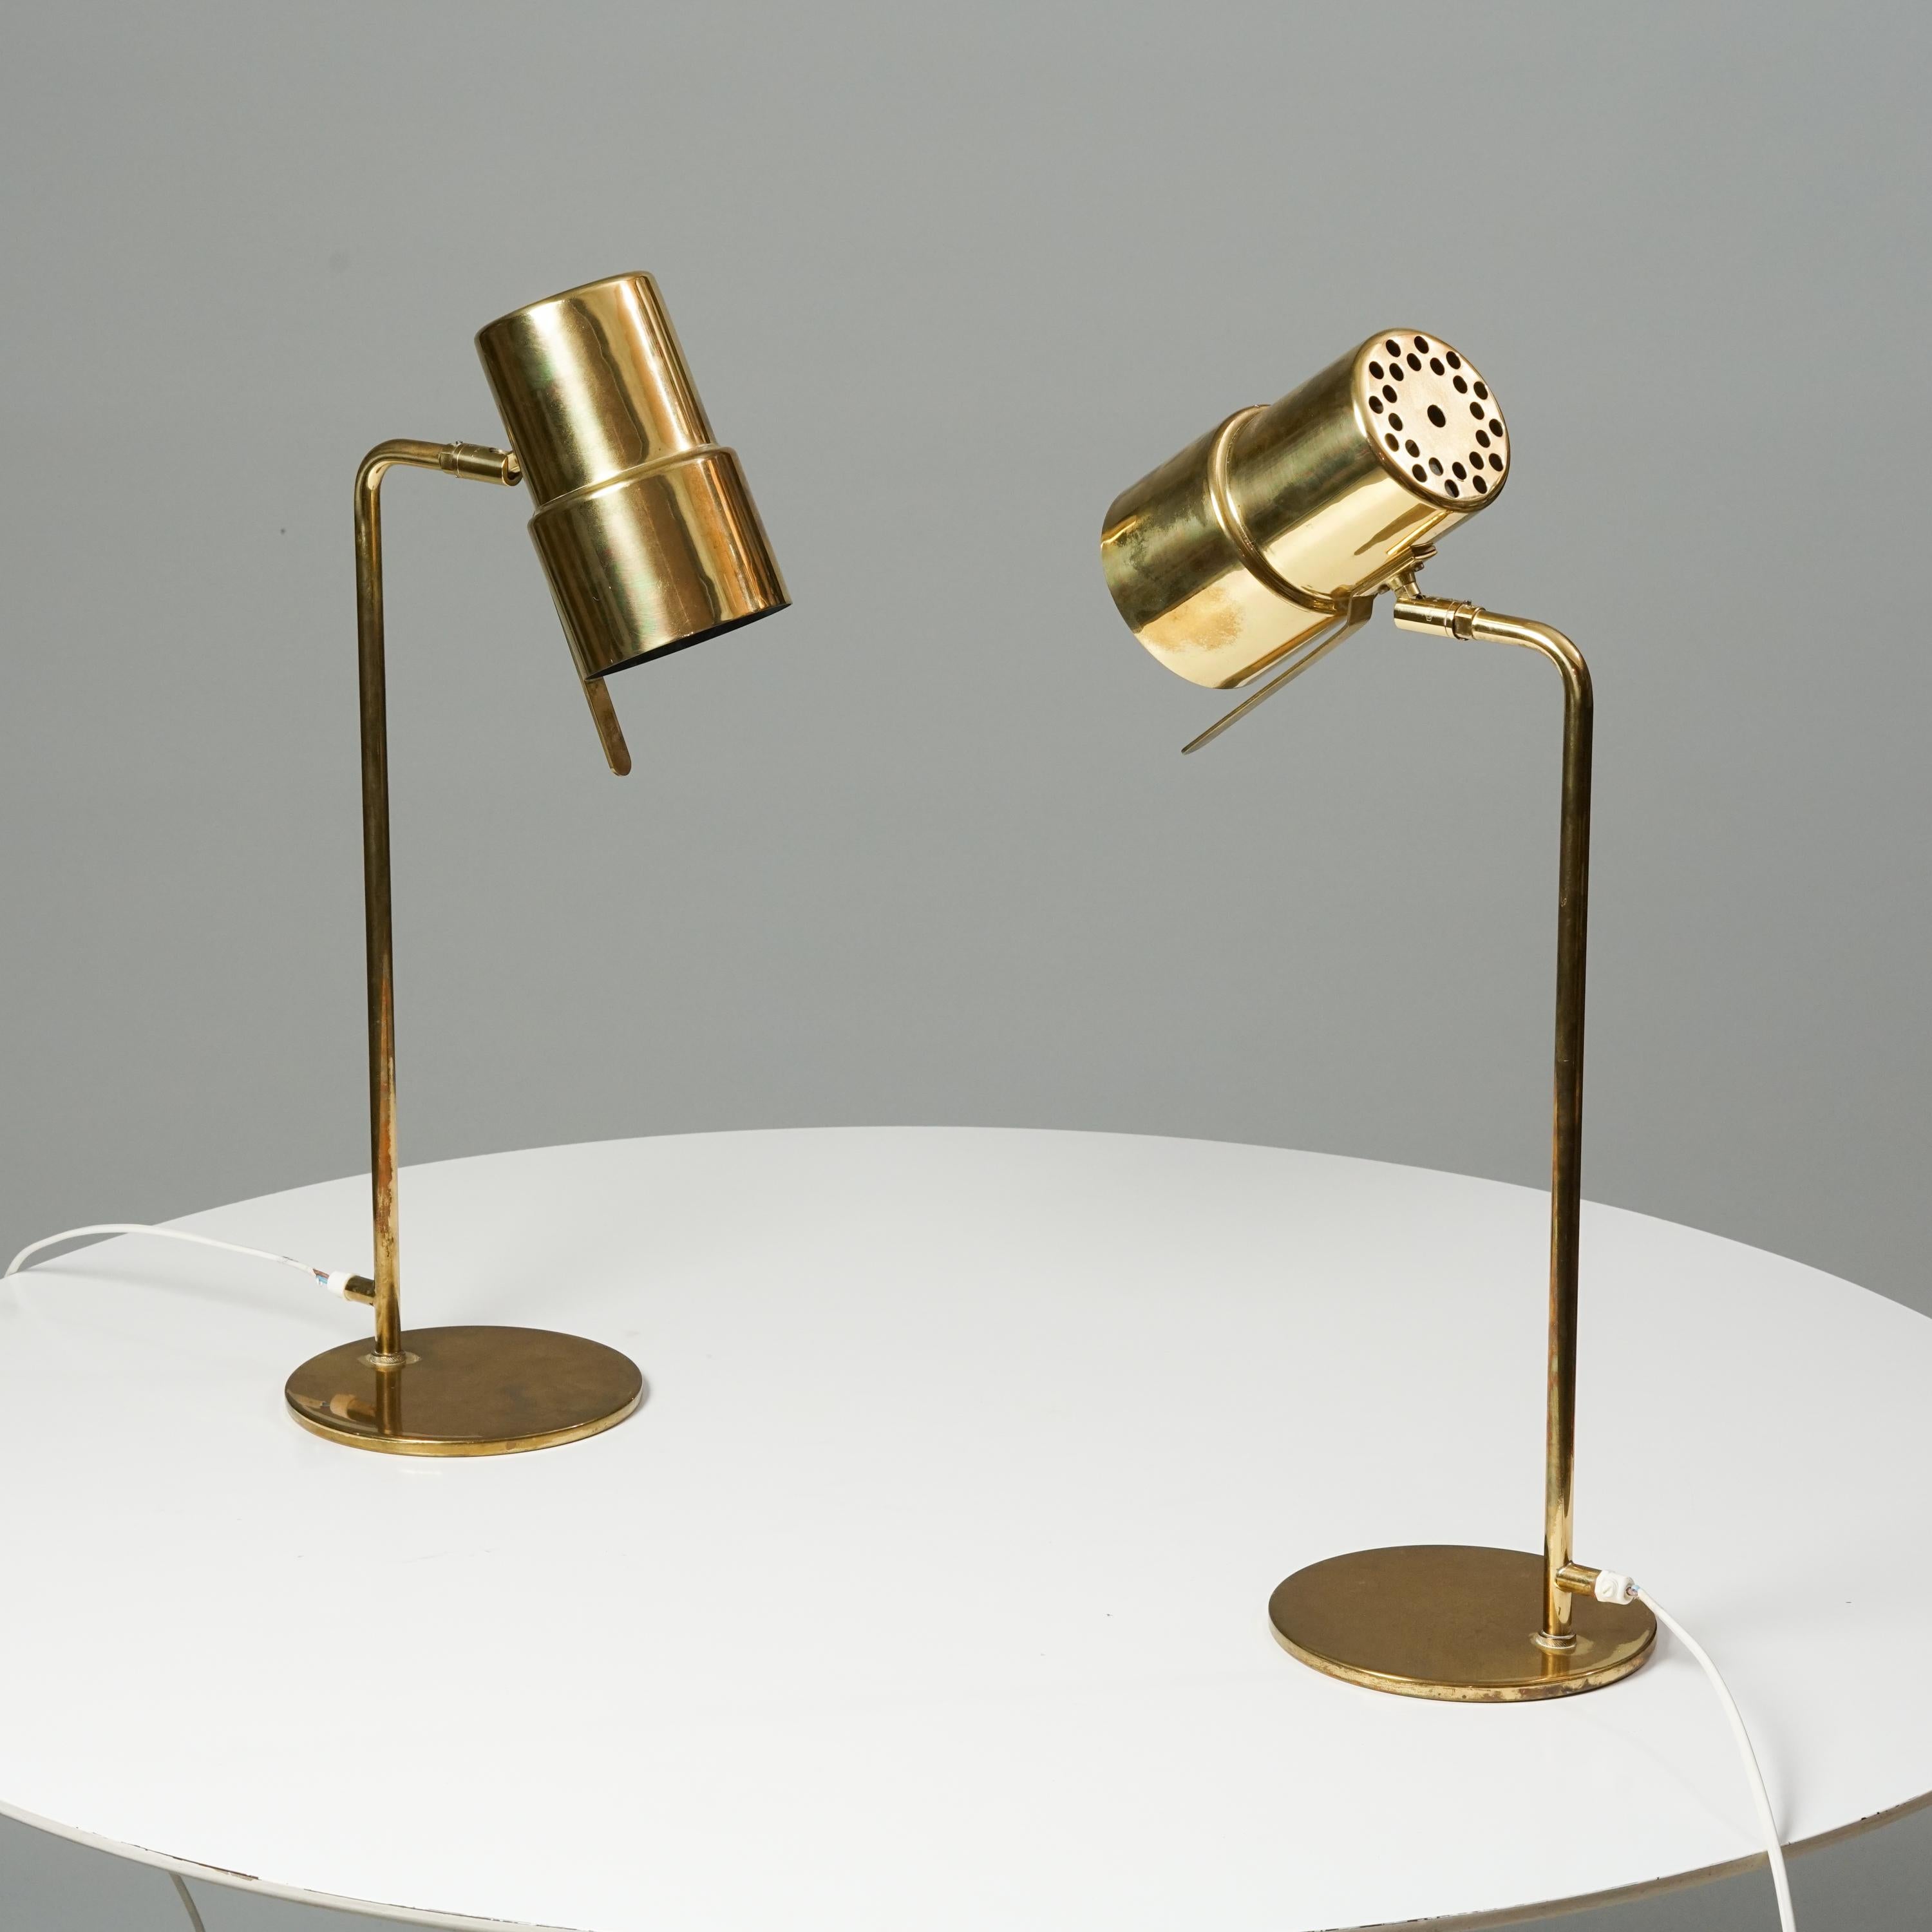 Pair of Model G154 table lamps, designed by Hans-Agne Jacobsson, manufactured by AB Markaryd, 1960s. Brass. Marked. Good vintage condition, minor patina consistent with age and use. The table lamps are sold as a set.

Hans-Agne Jakobsson (1919-2009)